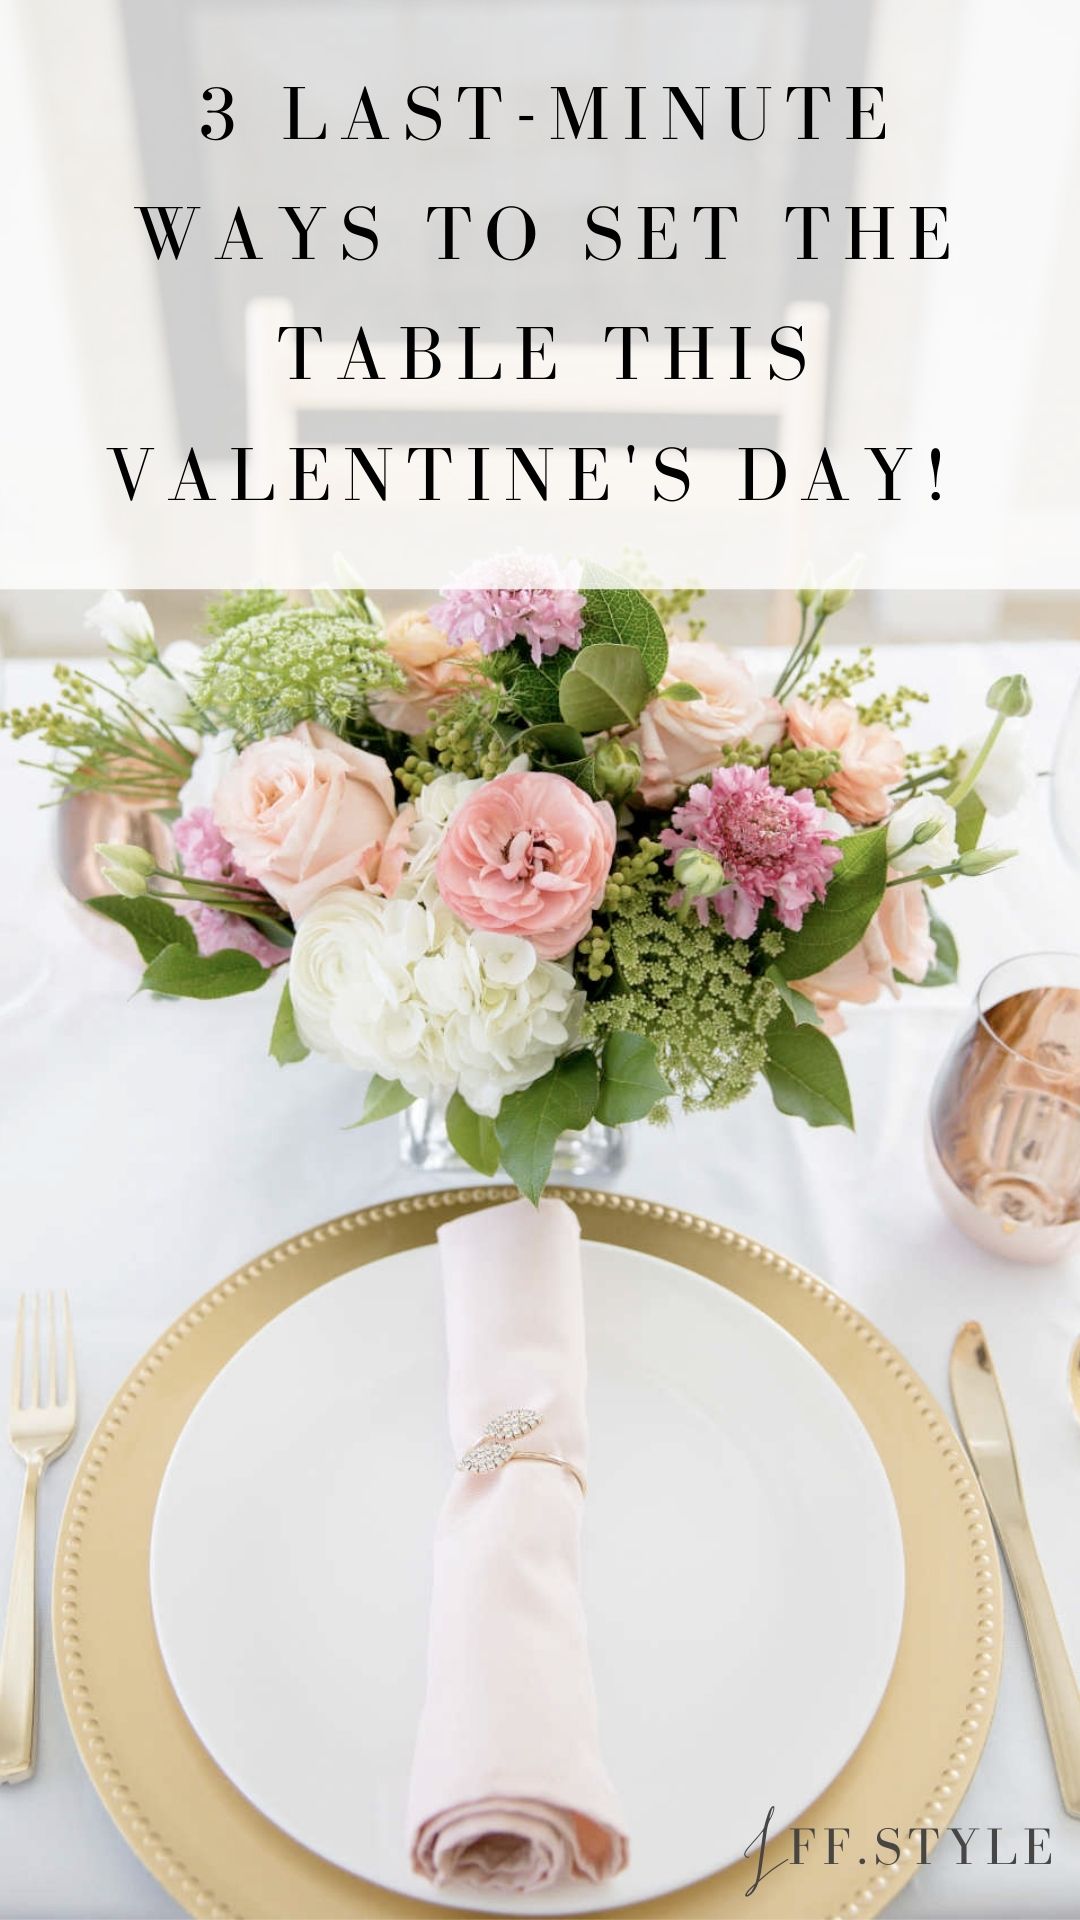 Pinterest Pin-3 Last-minute ways to set the table this Valentine's Day